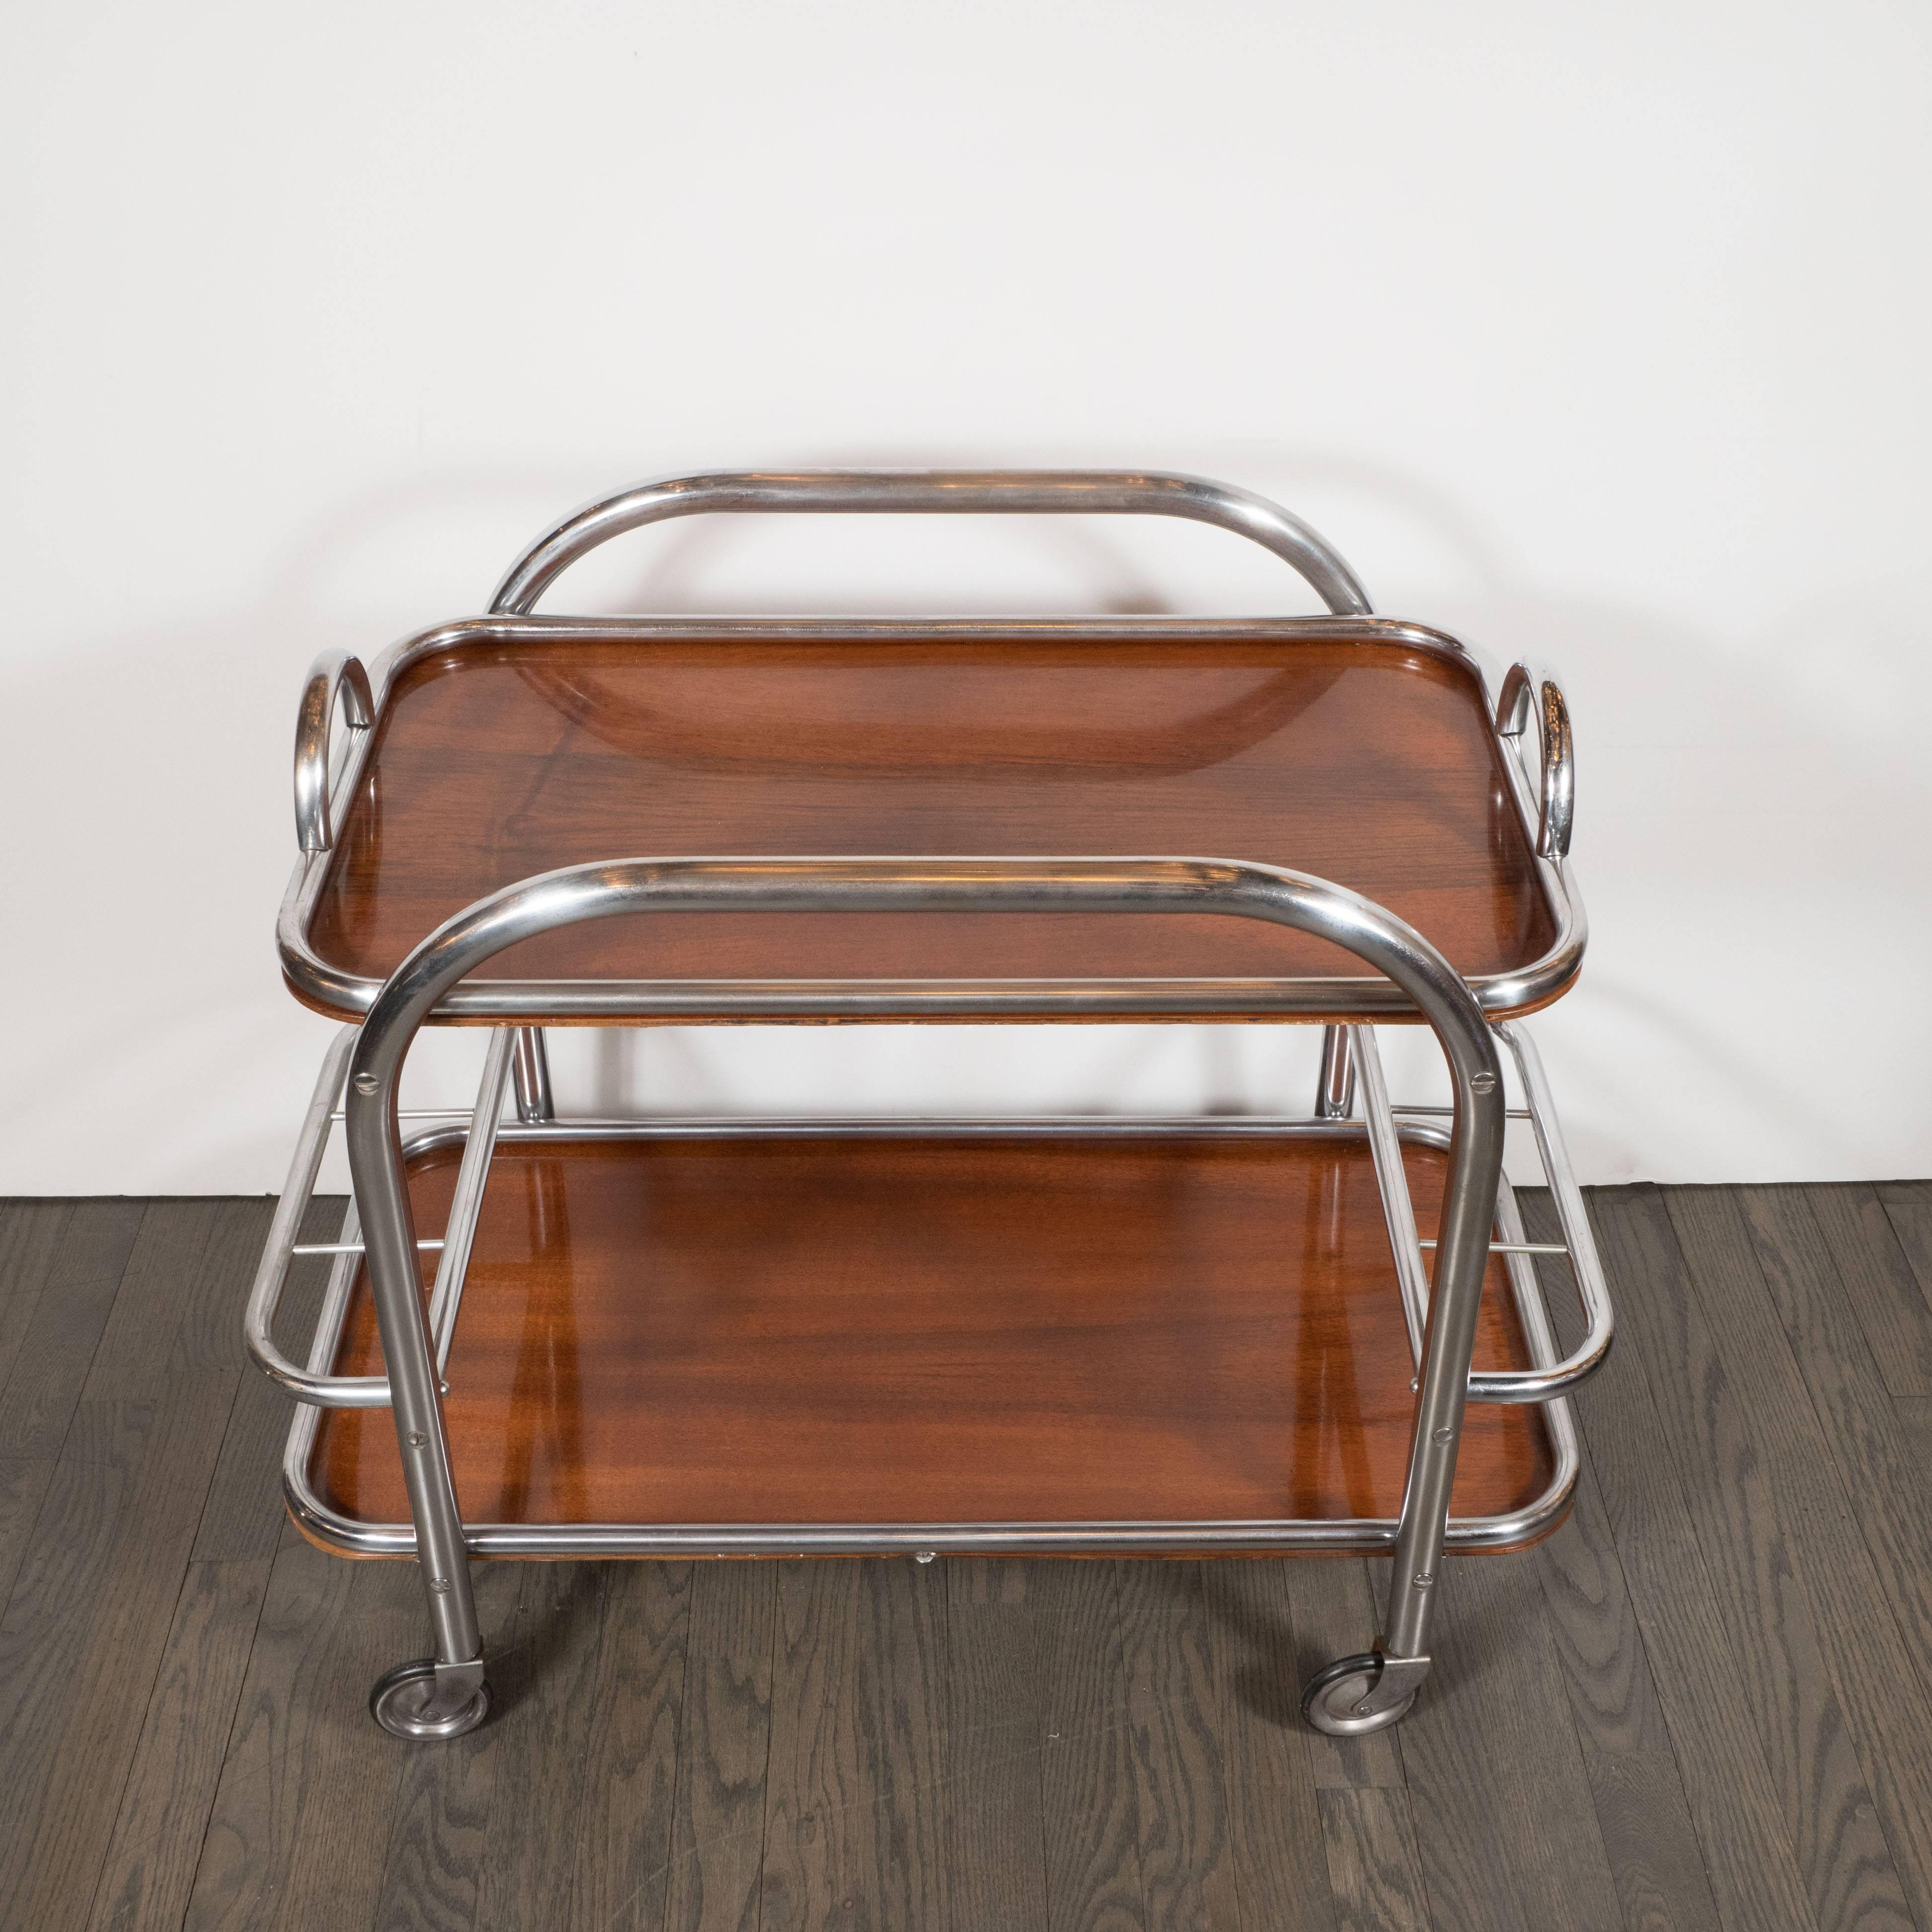 This Art Deco bar cart is made of tubular chrome with inset book-matched walnut two tiers. The top tier is a removable tray that would be wonderful for serving. The bottom tray is affixed to the bar cart. A great example of the Machine Age influence